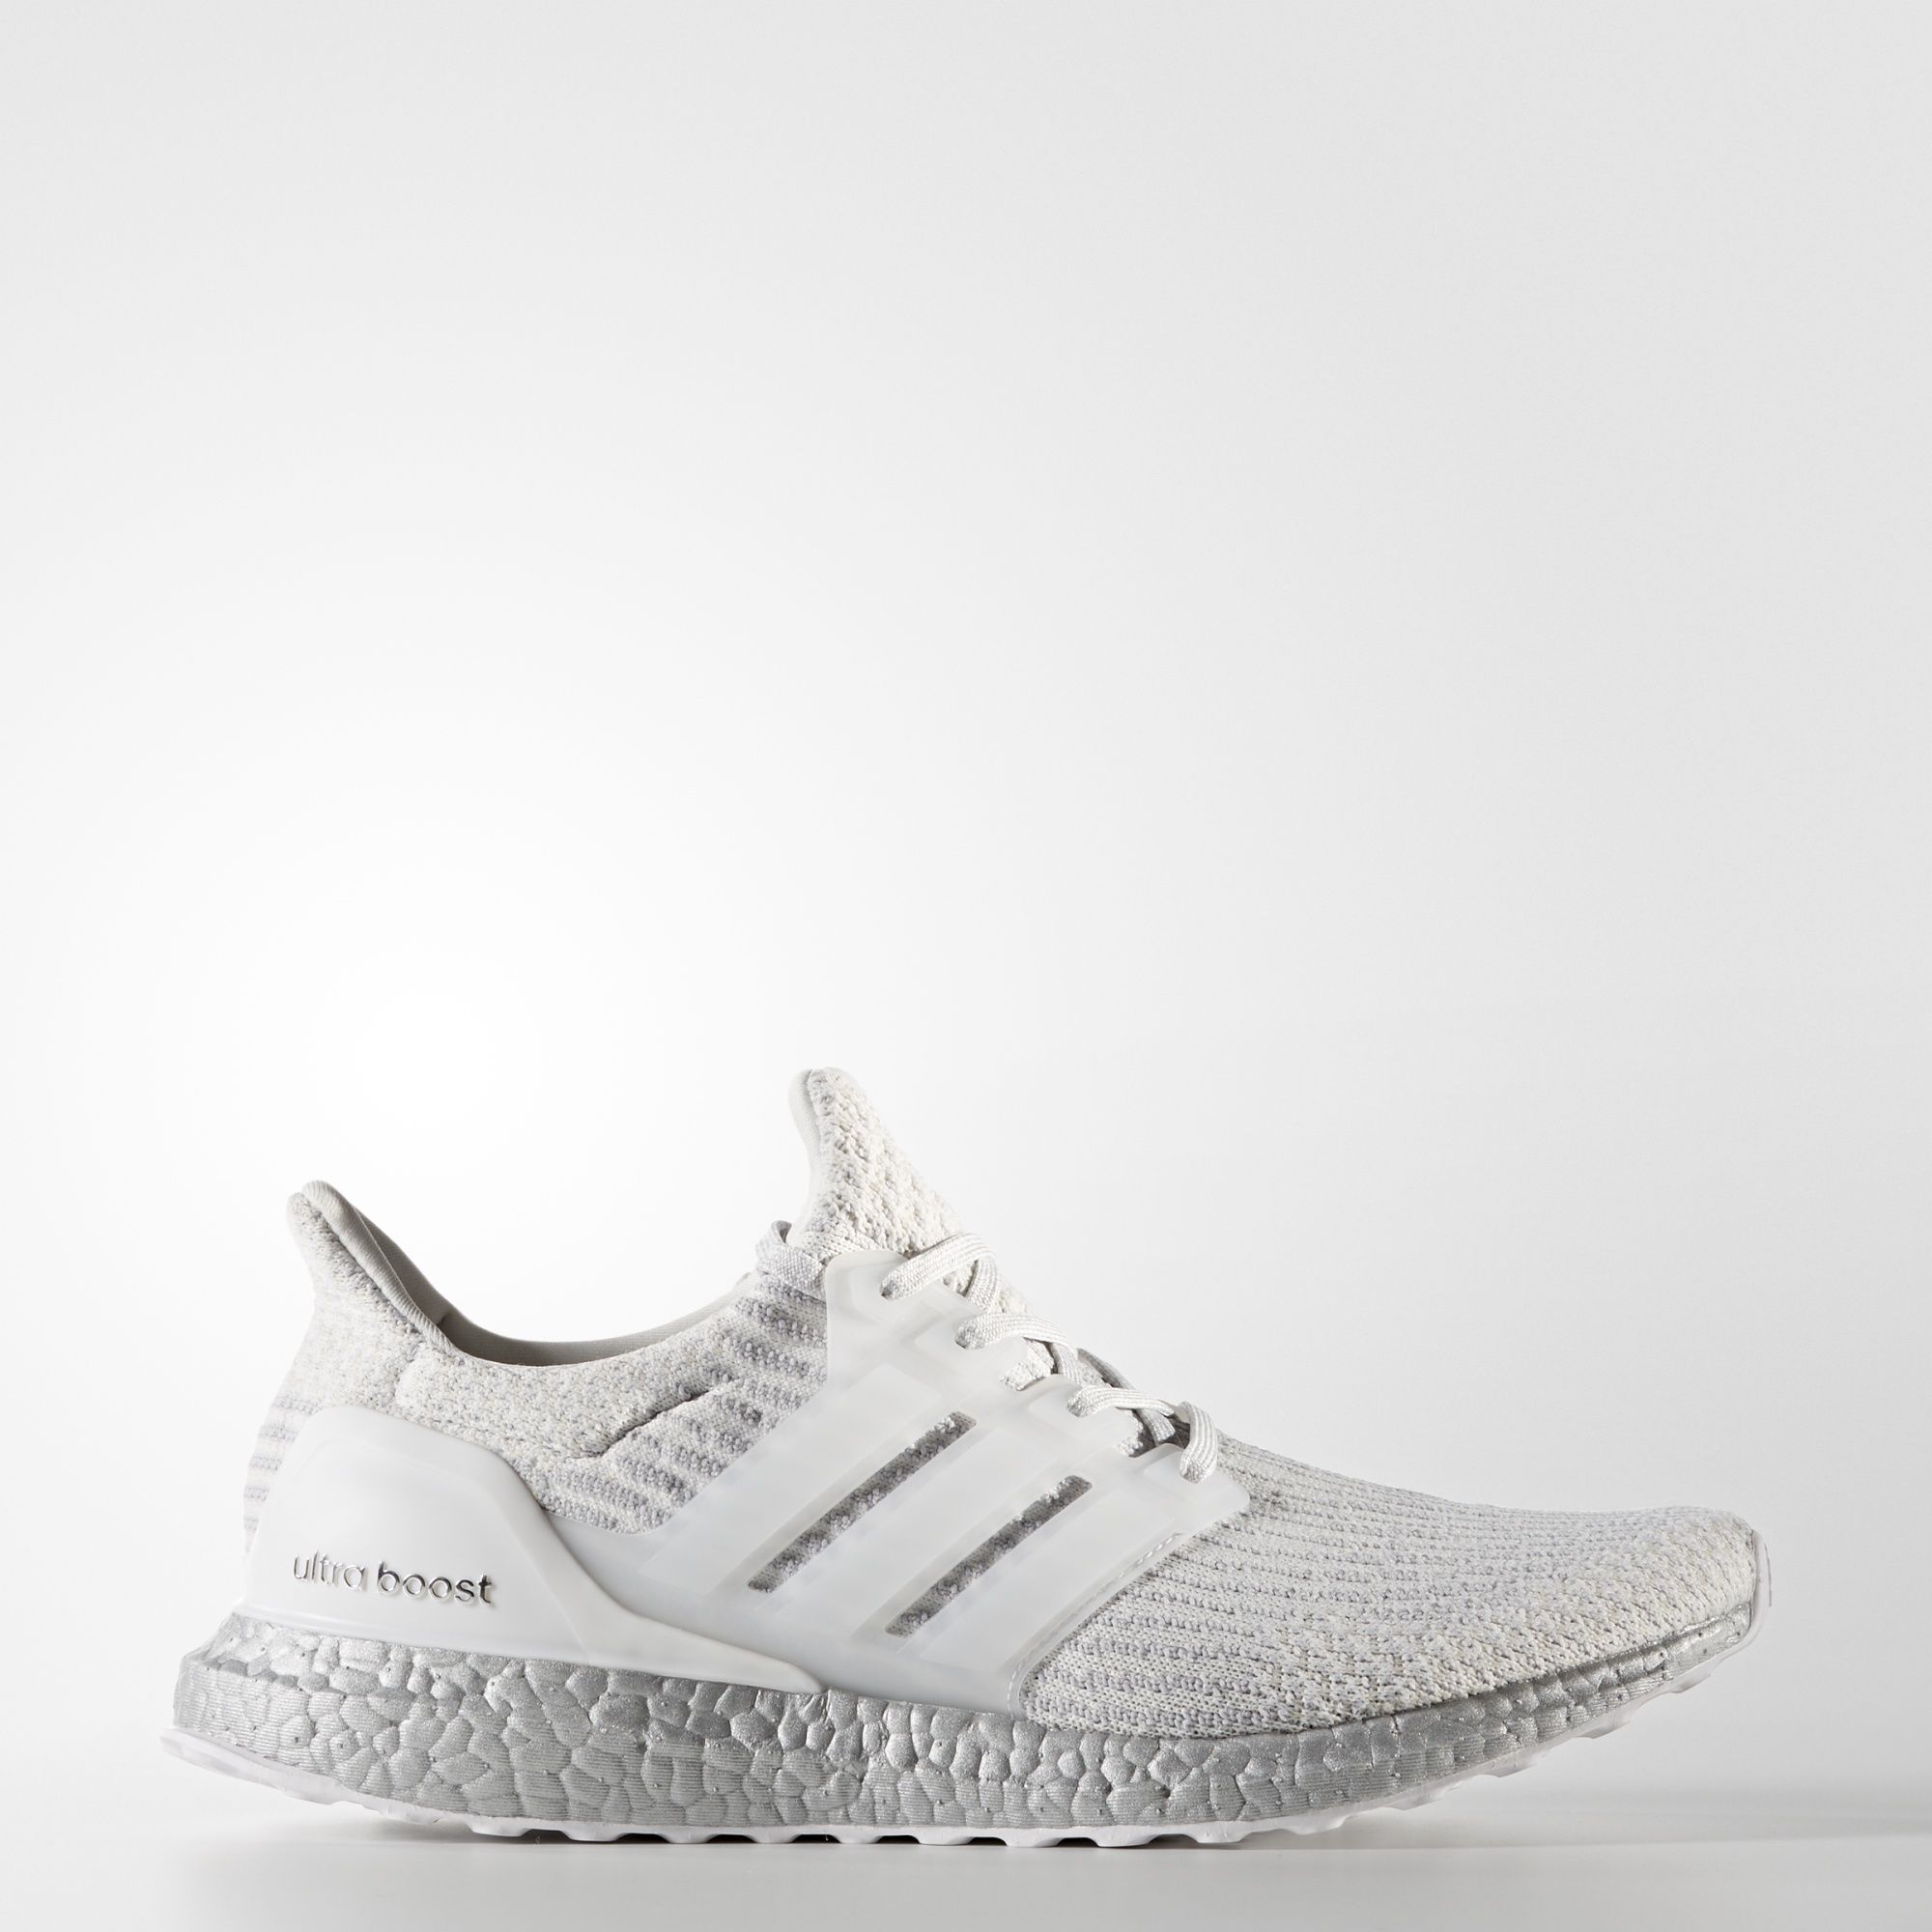 adidas-ultra-boost-3-0-crystal-white-silver-2